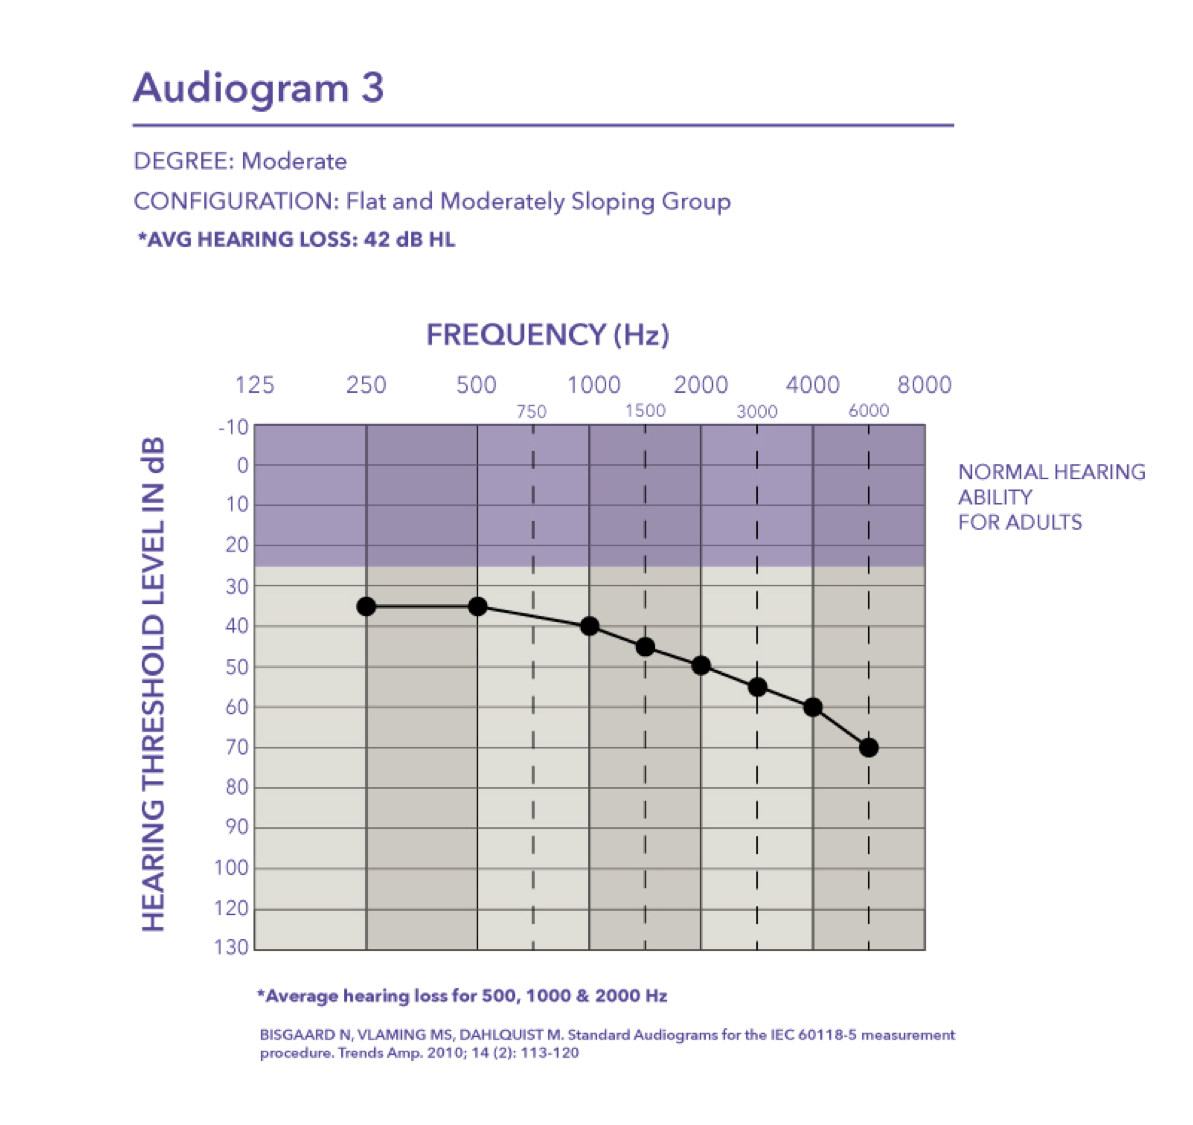 Approaching a moderate loss with the pure tone average of 42 dB HL